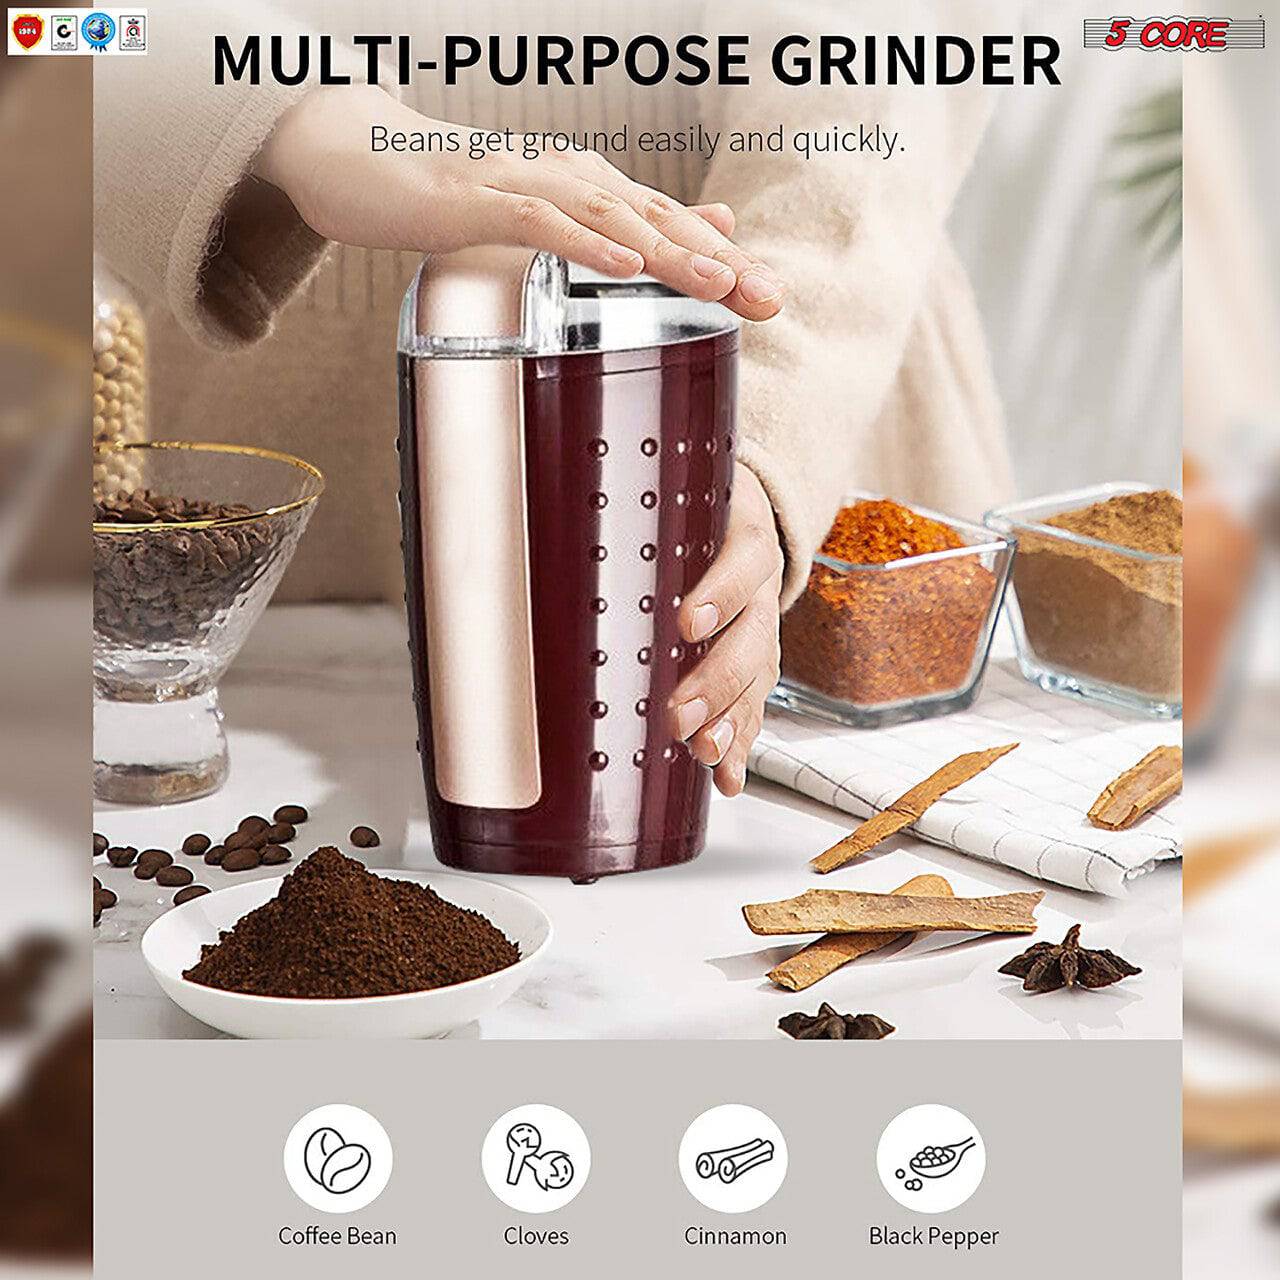 https://res.cloudinary.com/aeropost-inc/image/upload/IMX45W/5-core-coffee-grinders-5-core-electric-coffee-grinder-stainless-steel-4-5oz-capacity-with-easy-on-off-5-core-cg-01-black-brown-37306561462509__1351656882.jpg